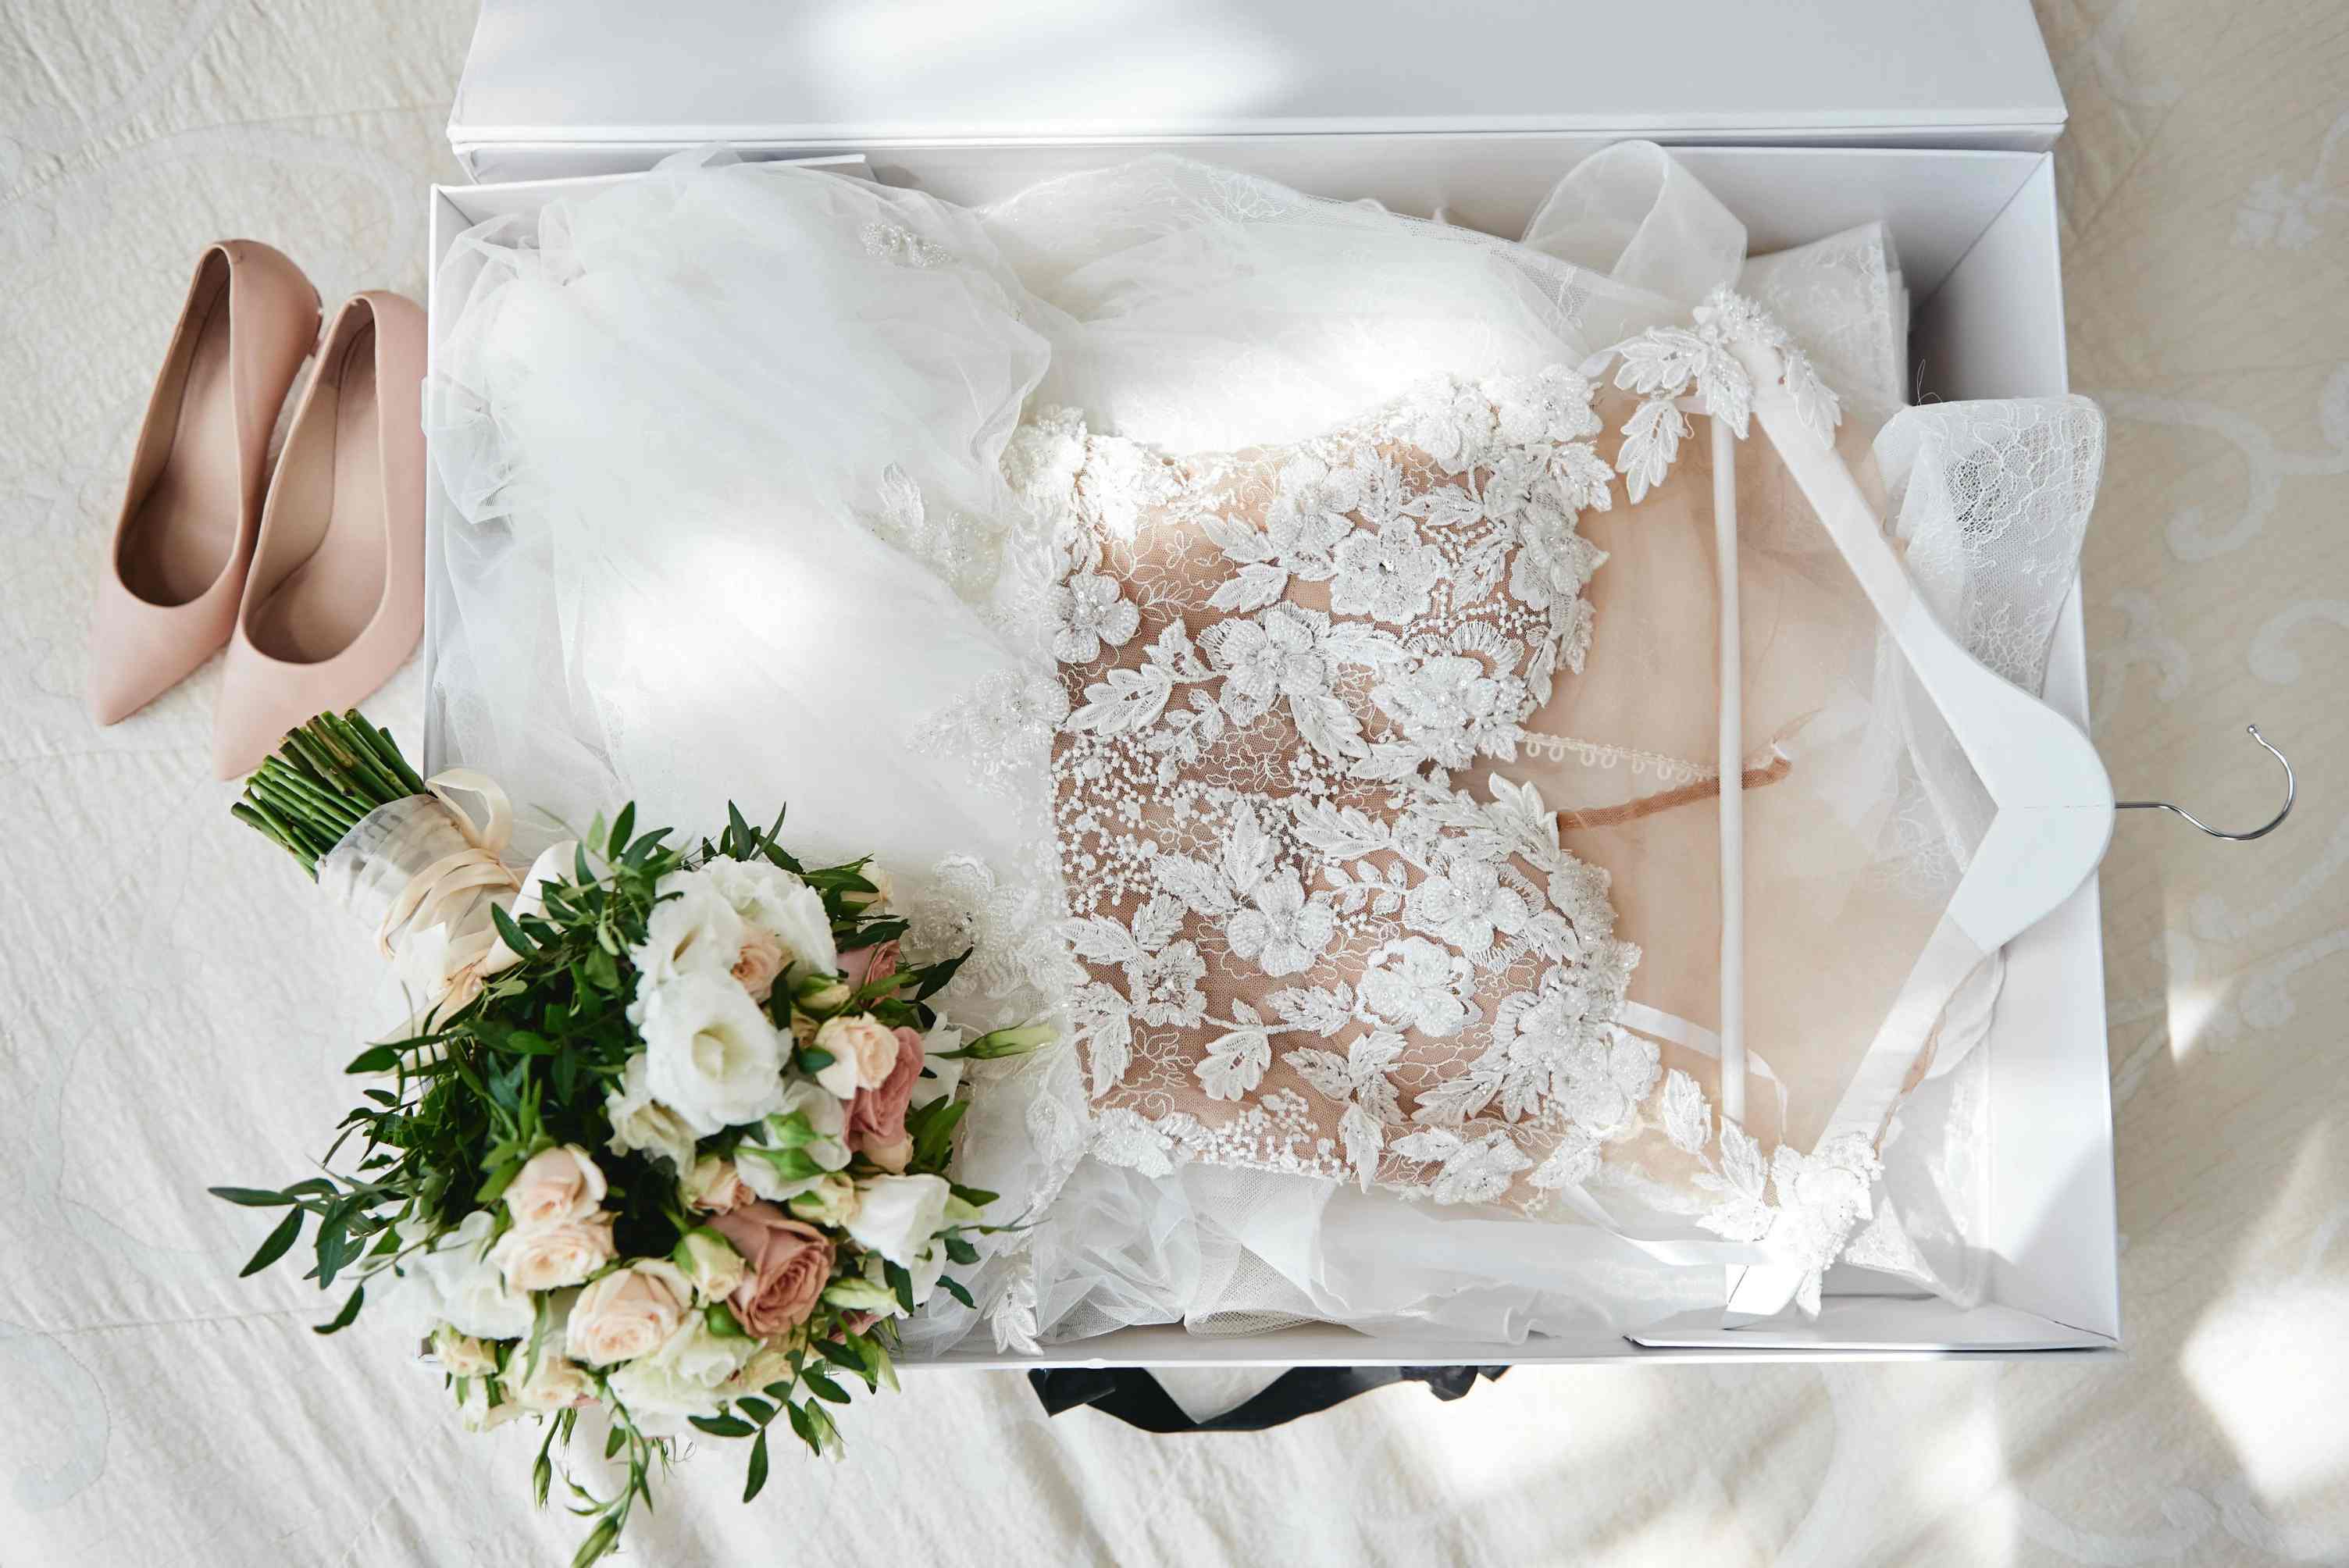 How To Store Wedding Dress Long Term